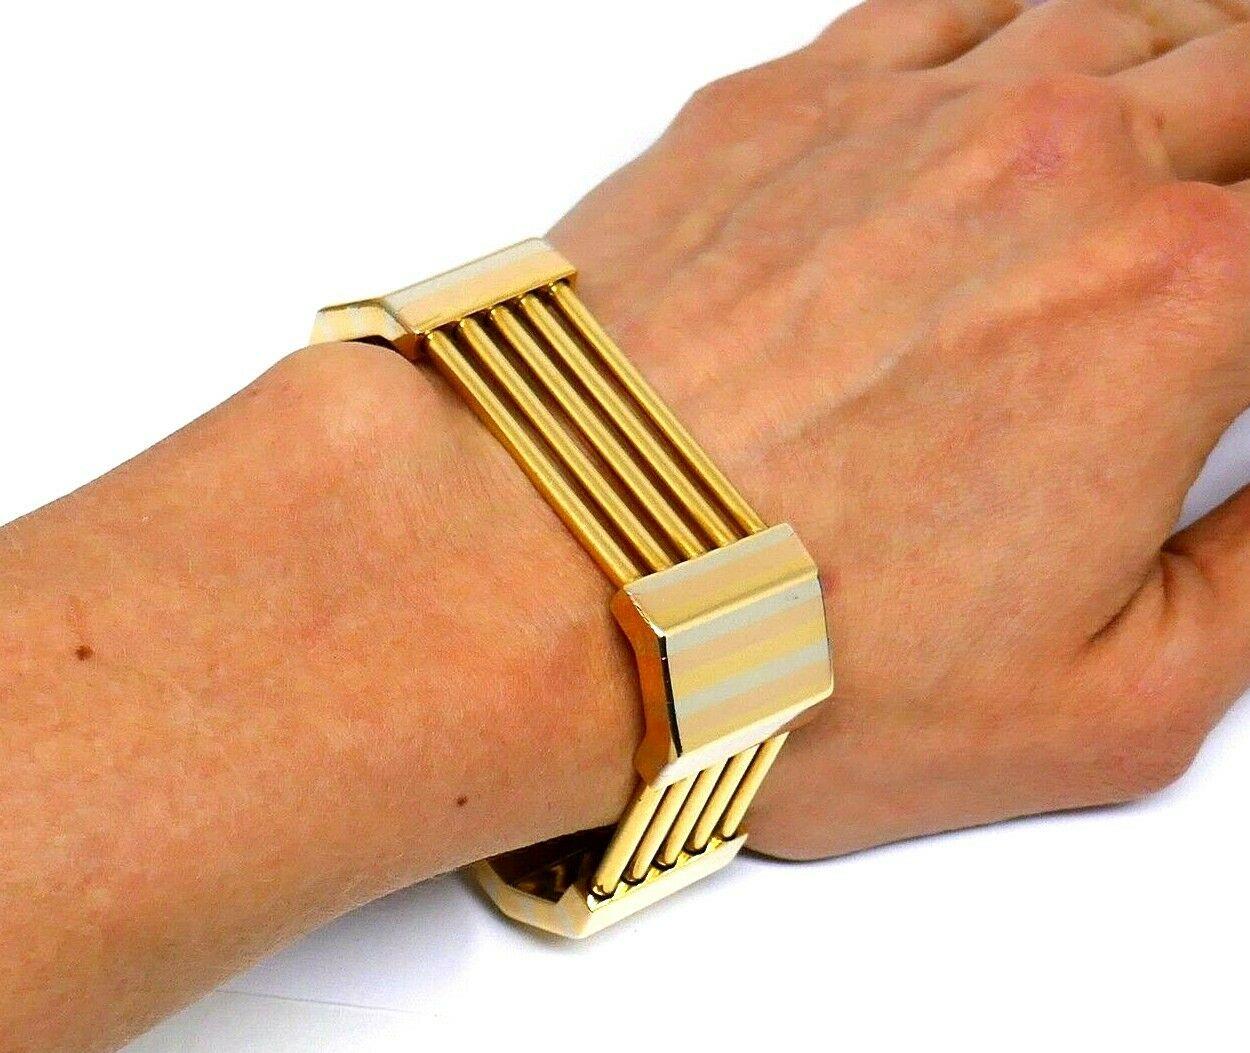 An unusual shape and tri-tone golden stripes on the sides make this bracelet a truly unique piece you'll be wearing every day.
Featuring 18k rose, white and yellow gold inlay that works perfectly well with the yellow gold bars. This bracelet is made